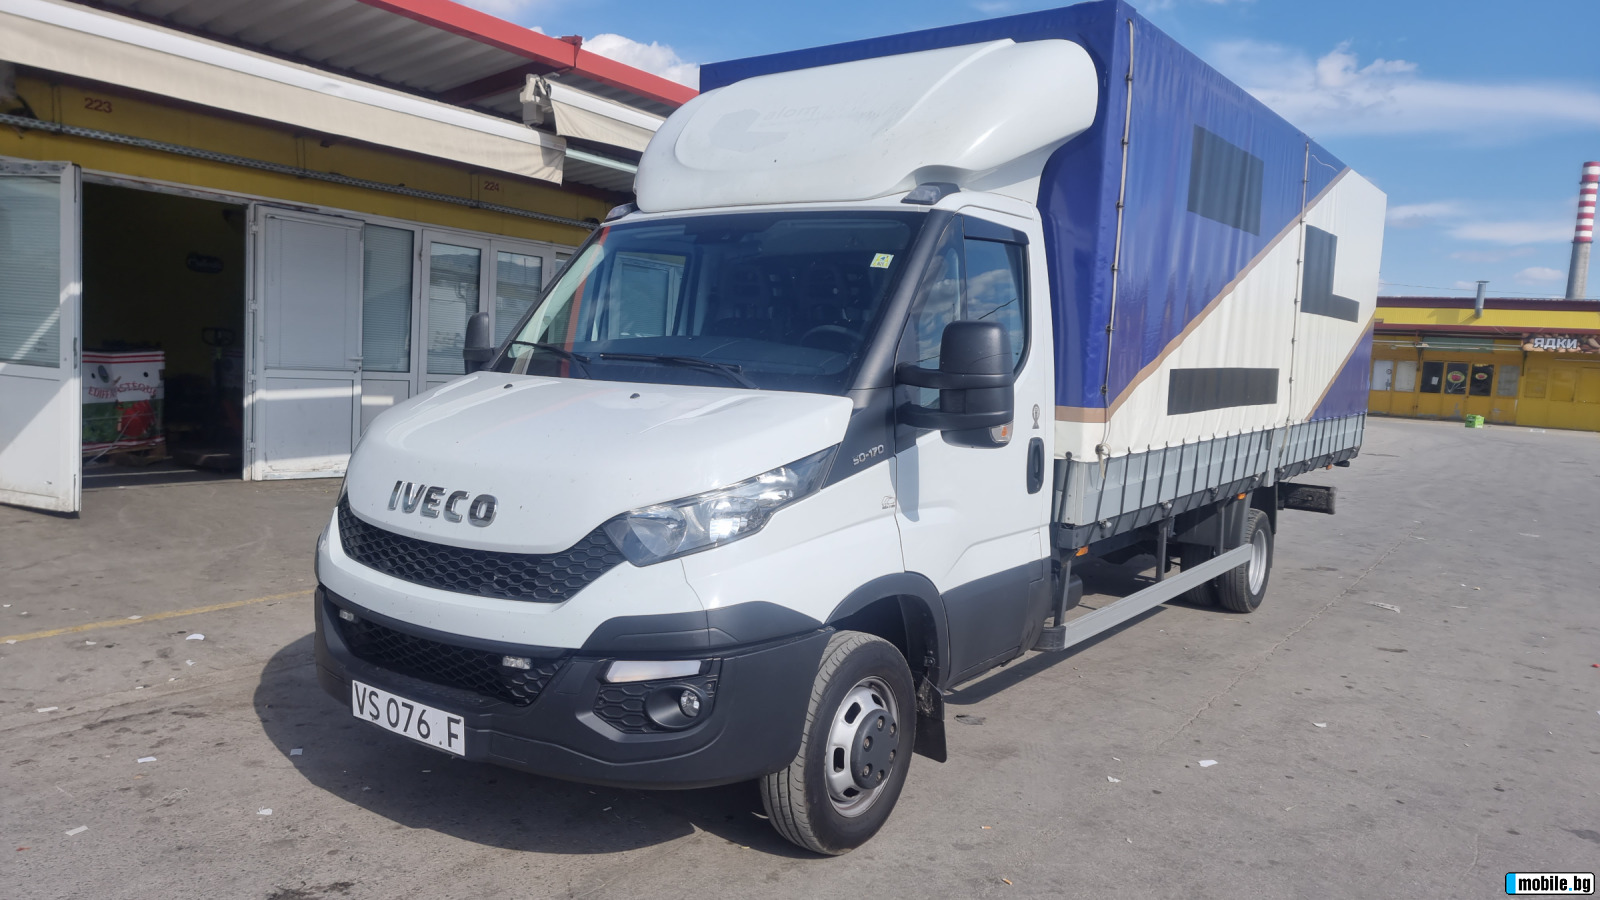 Iveco Daily 35/15 3.0D 6.2M 3.5t  | Mobile.bg   3